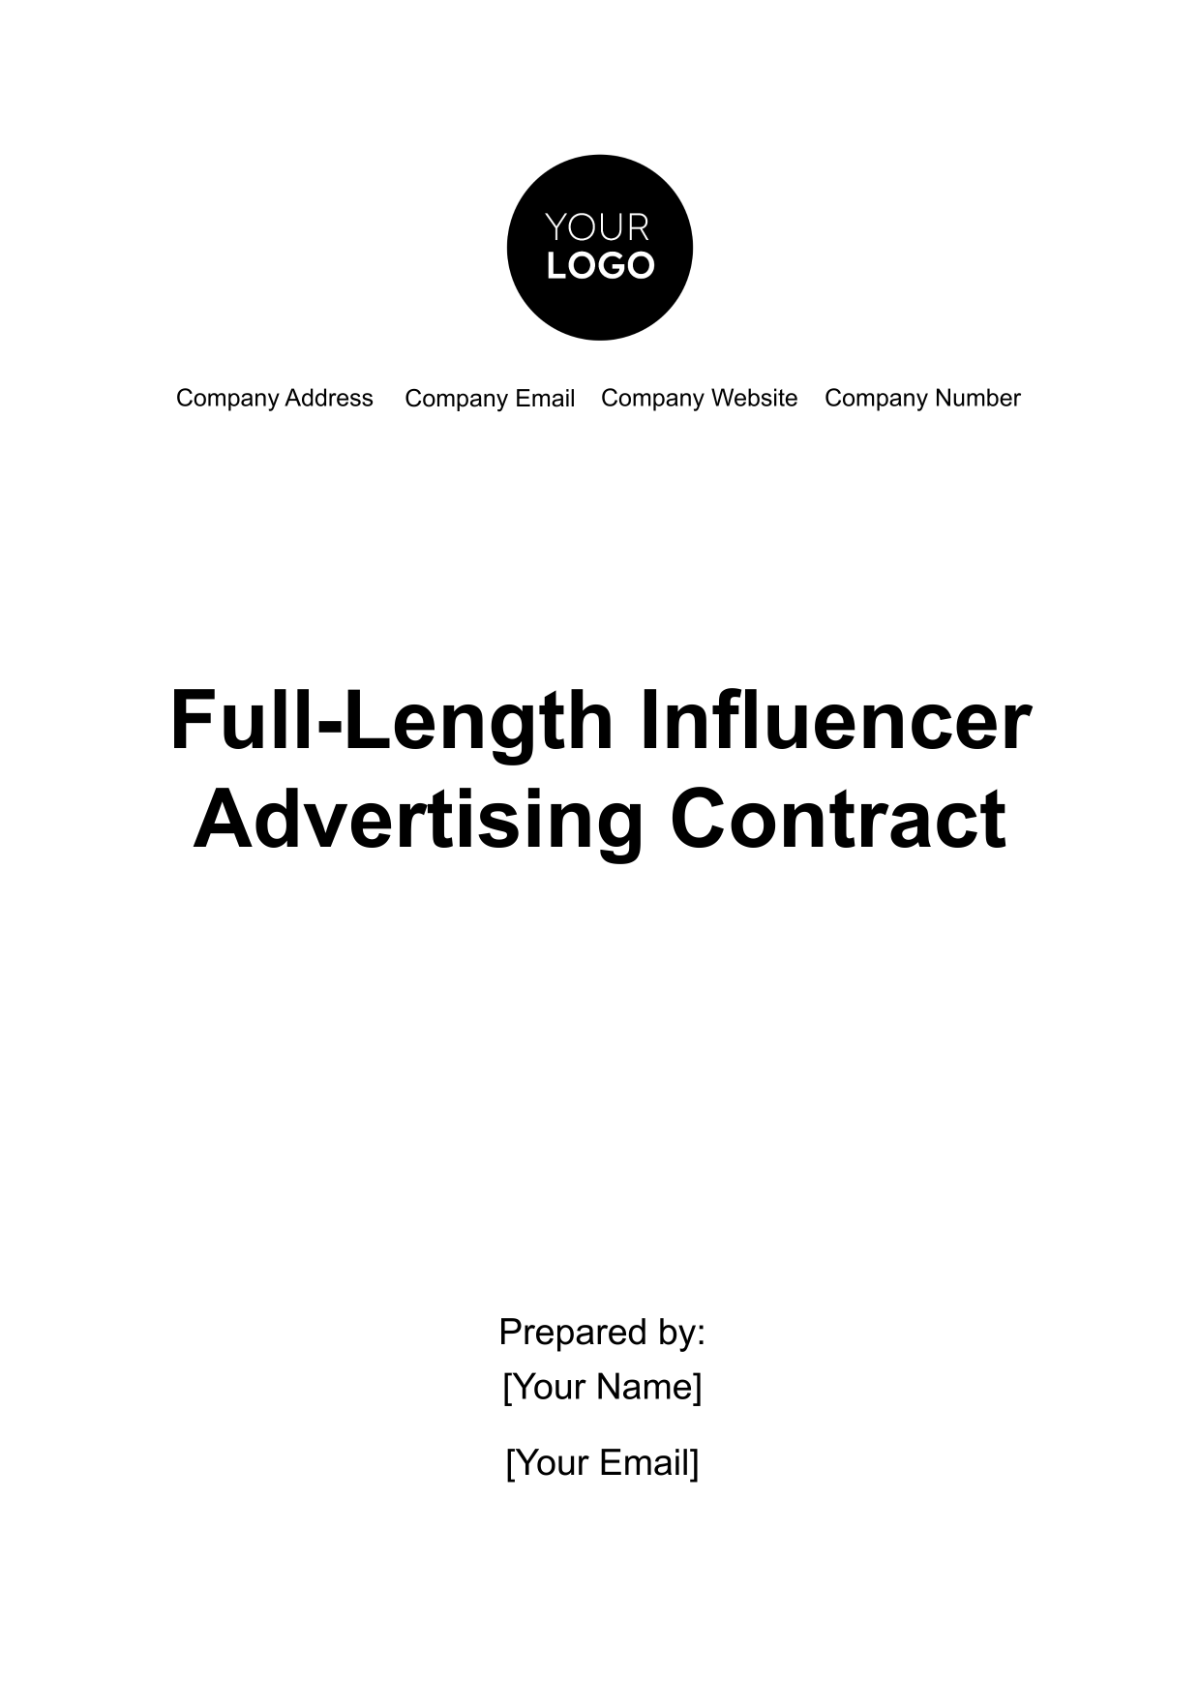 Free Full-Length Influencer Advertising Contract Template